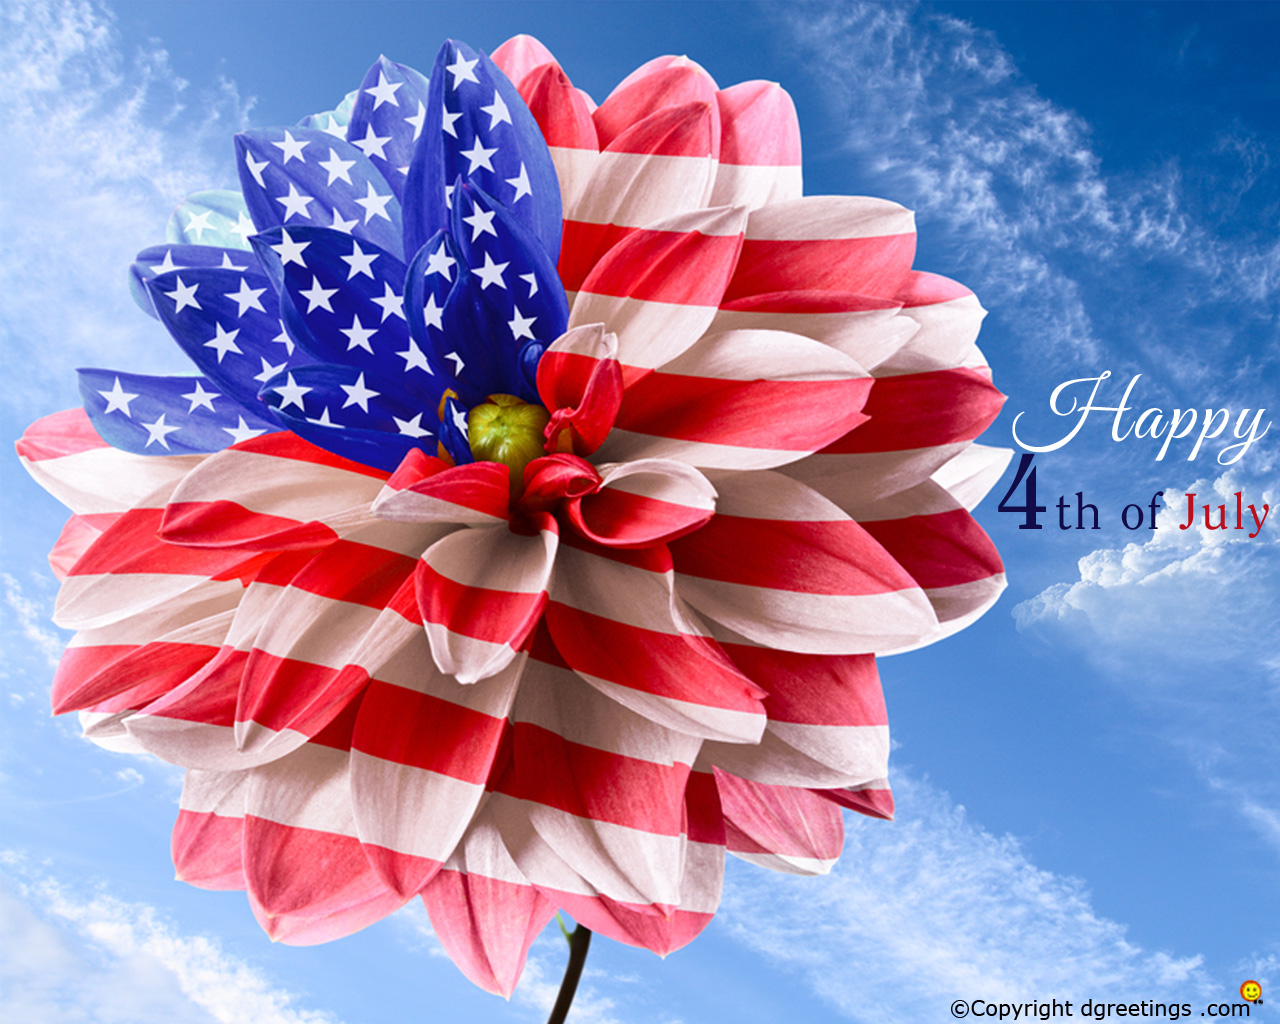 4th of July 2020  Wallpapers Photos Images Pictures 